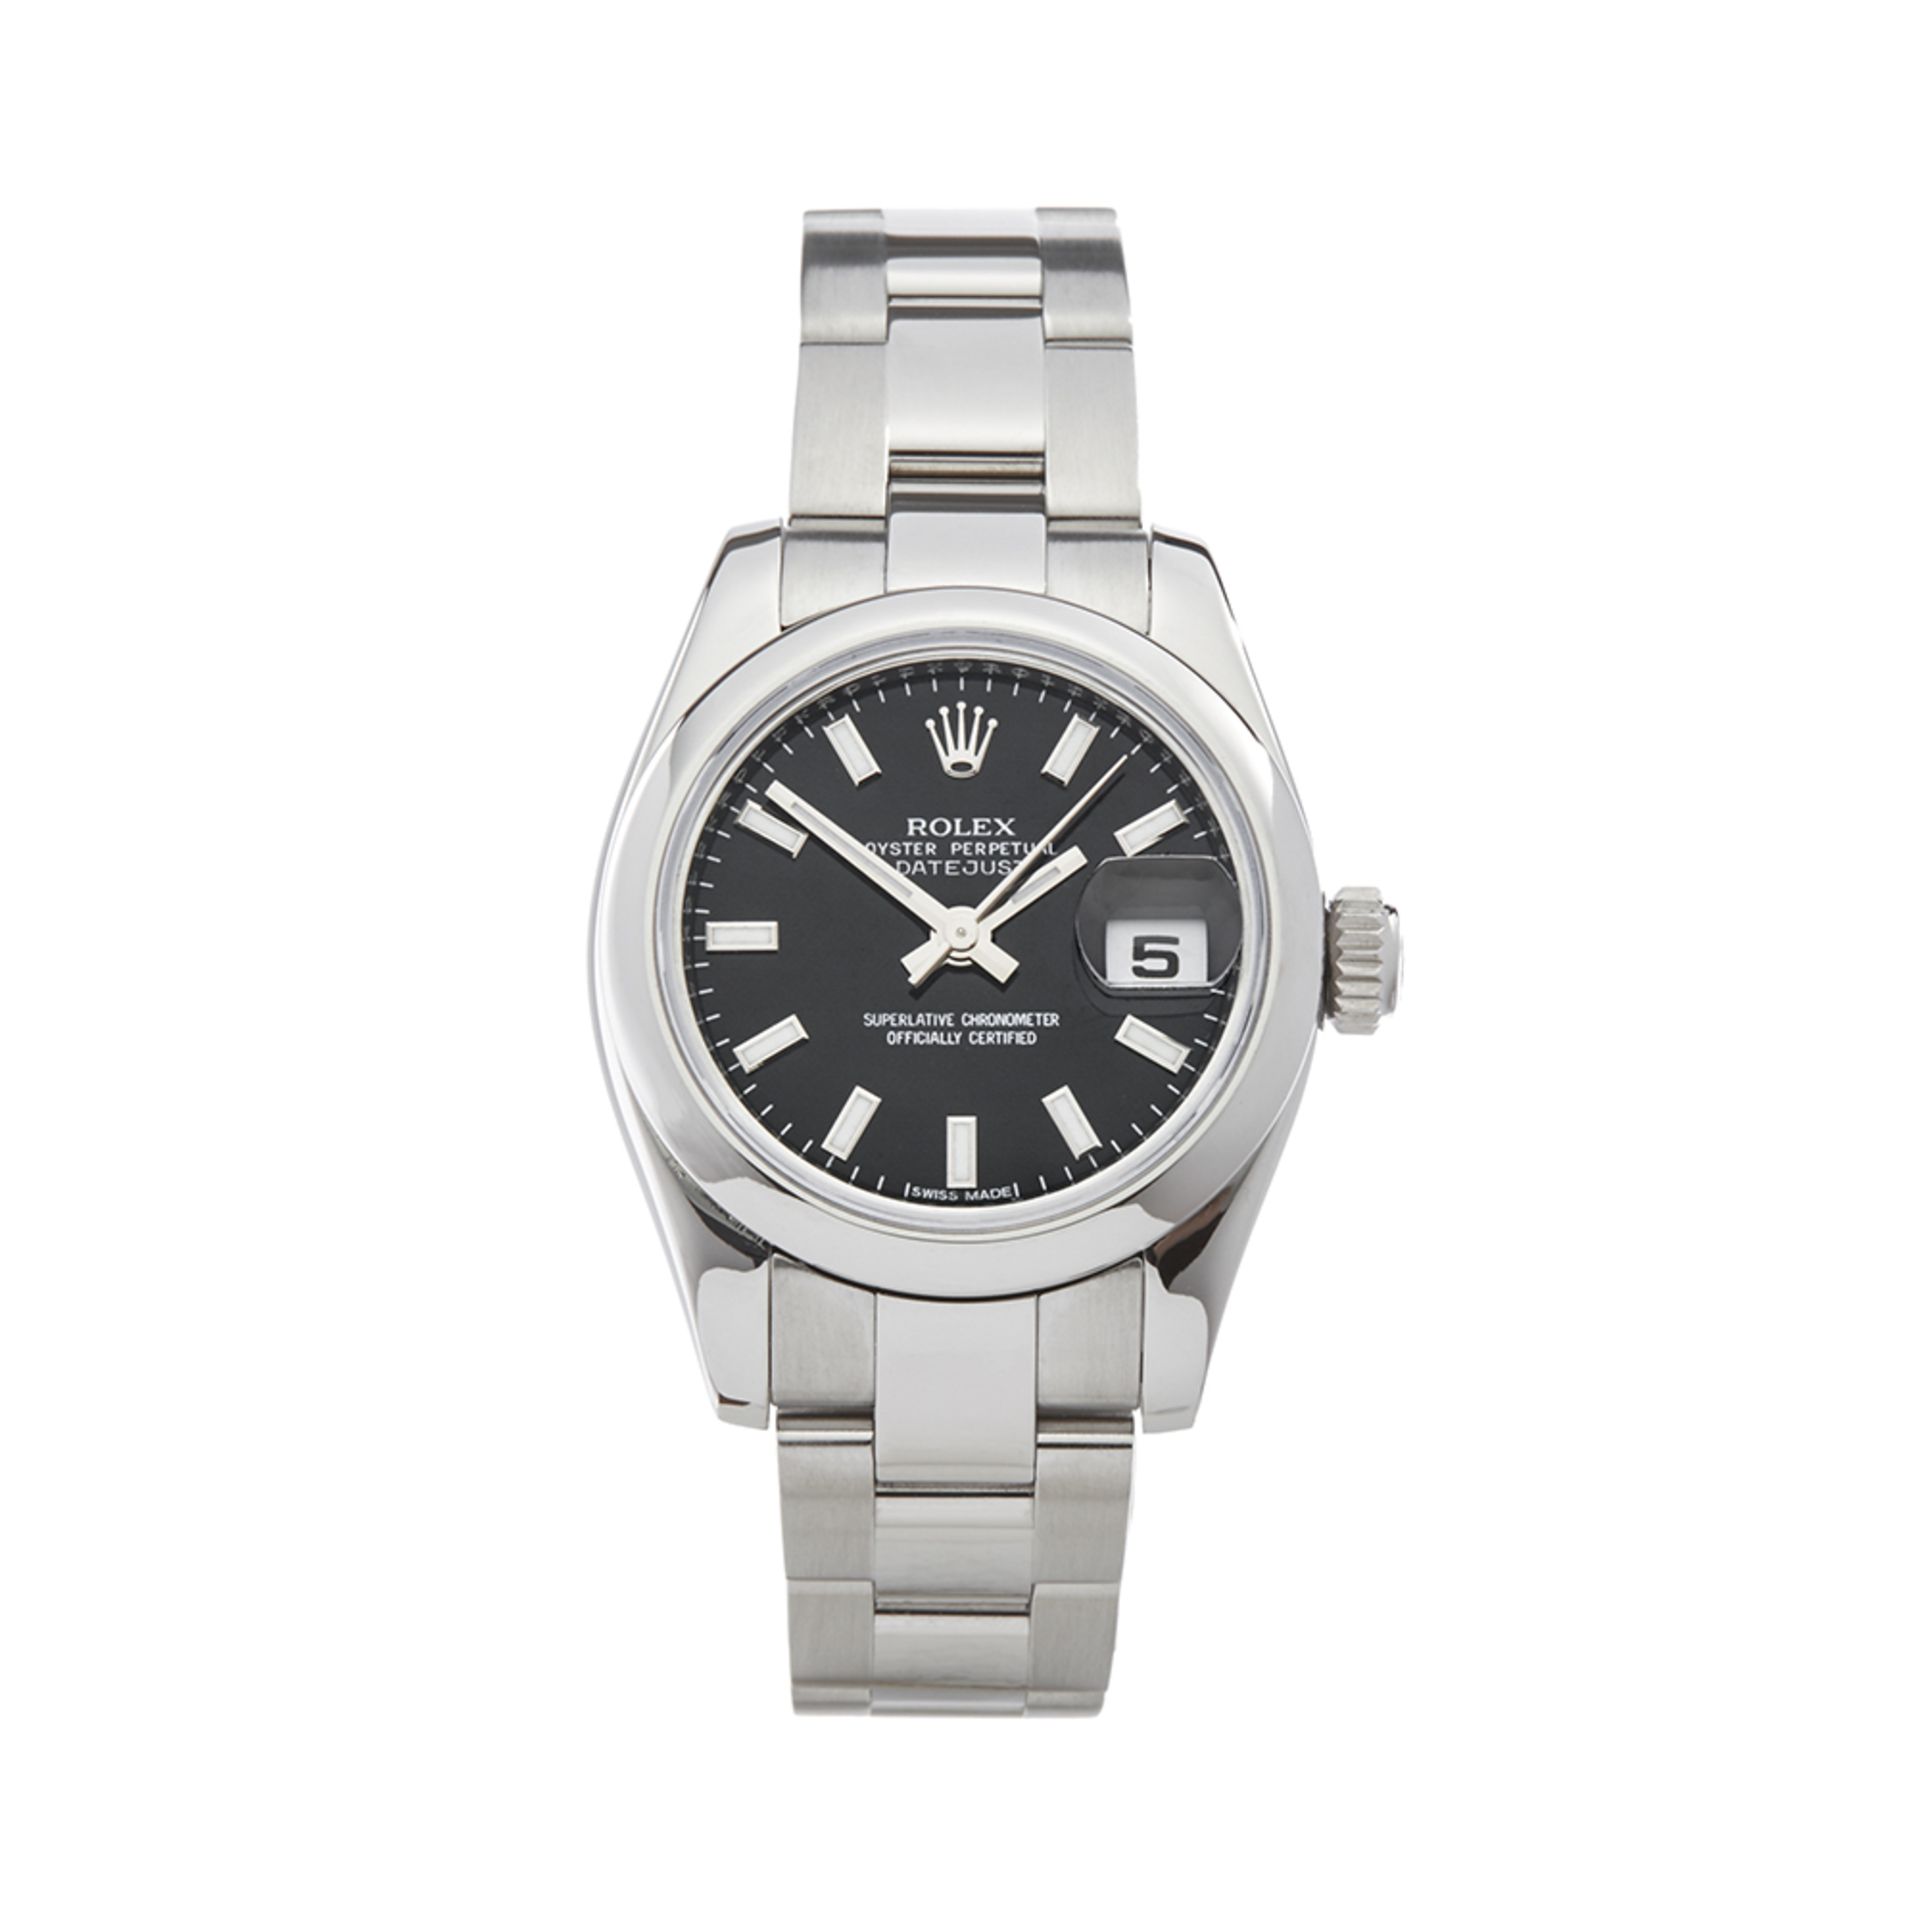 Datejust 26mm Stainless Steel - 179160 - Image 2 of 7